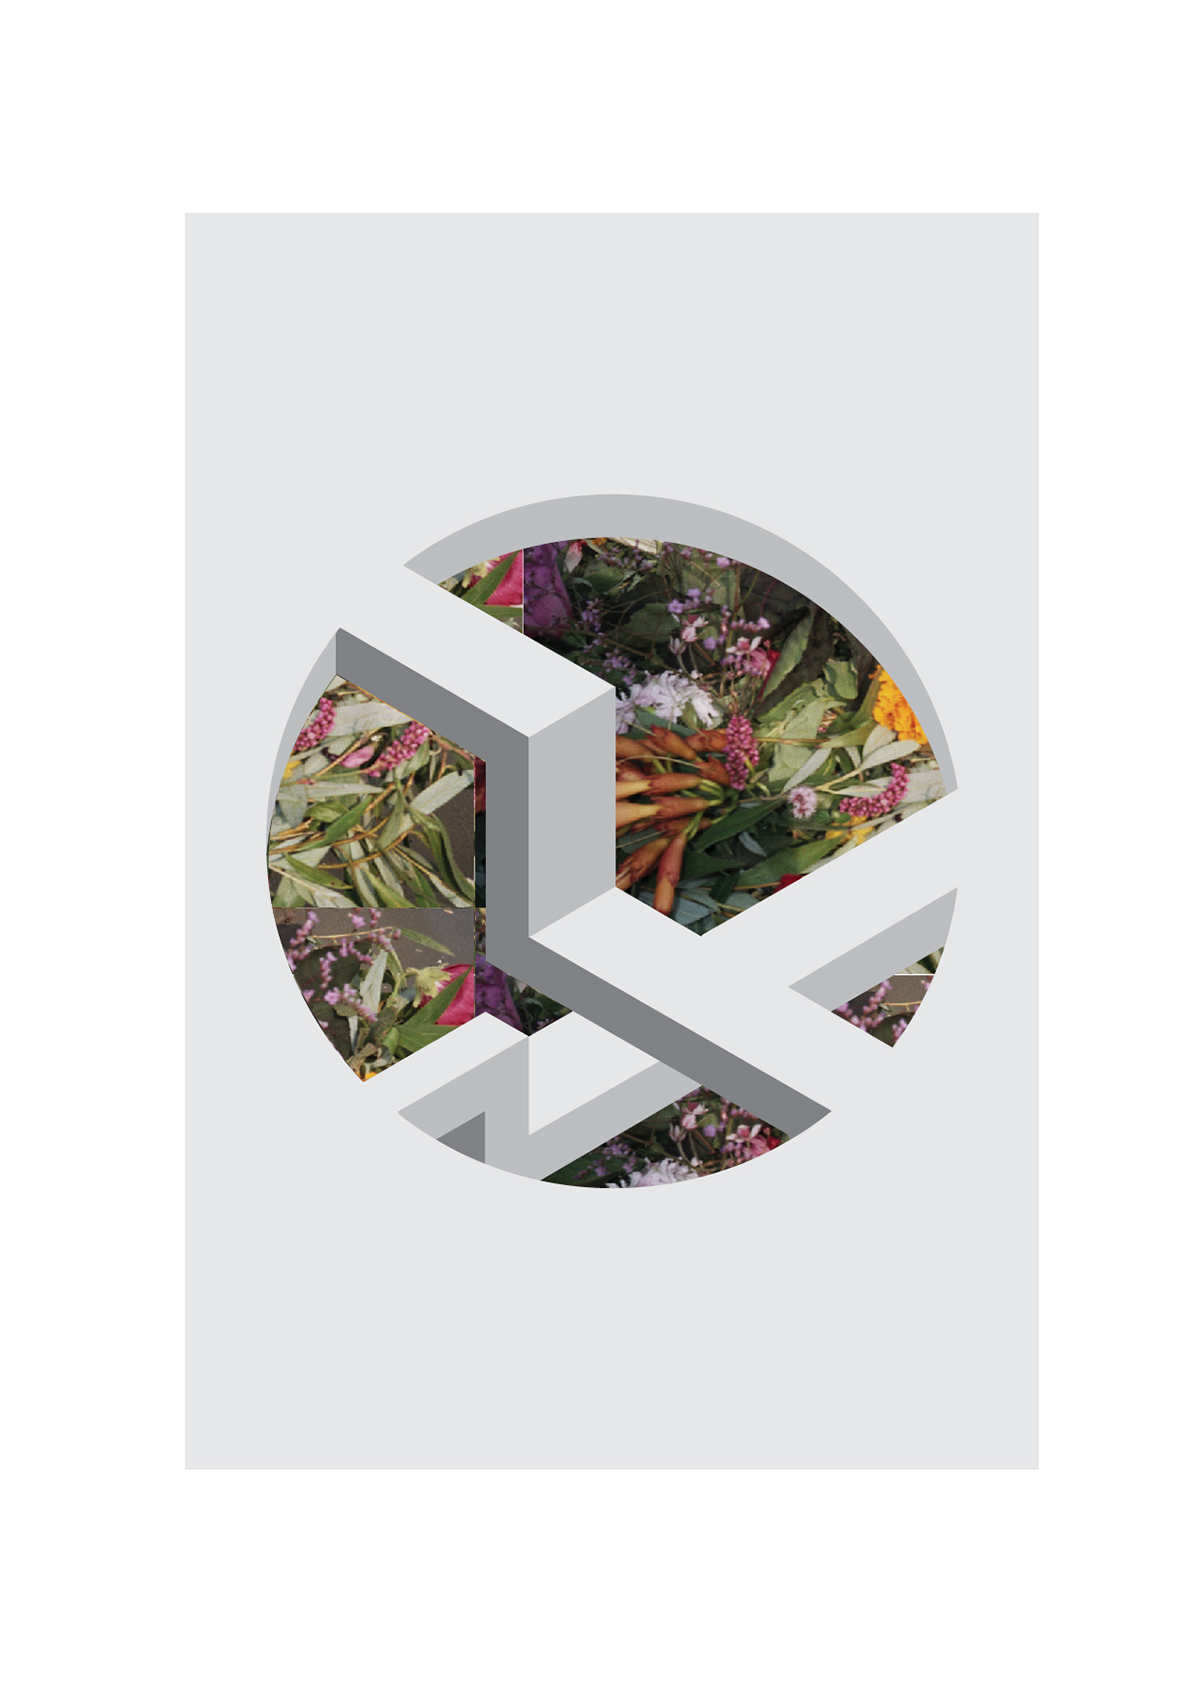 Matchbox impossible object Oscar Reutersvärd  package Flowers pattern vectors illusion optical circle photograph collage grey grid